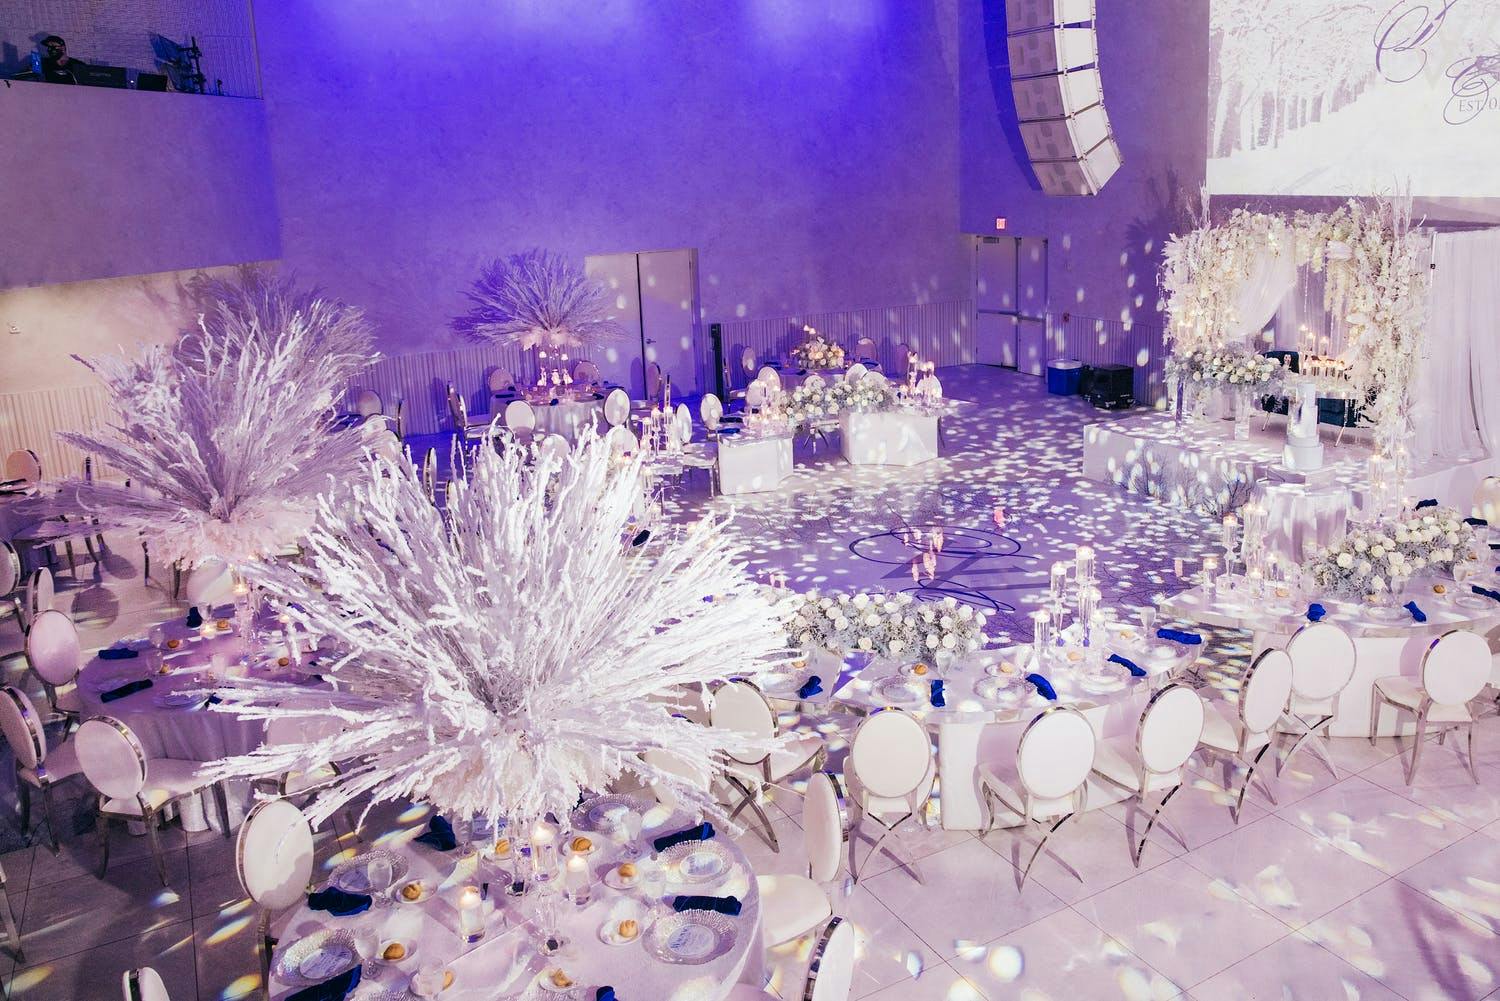 Winter wonderland wedding with purple uplighting and frosted white branch wedding centerpieces | PartySlate